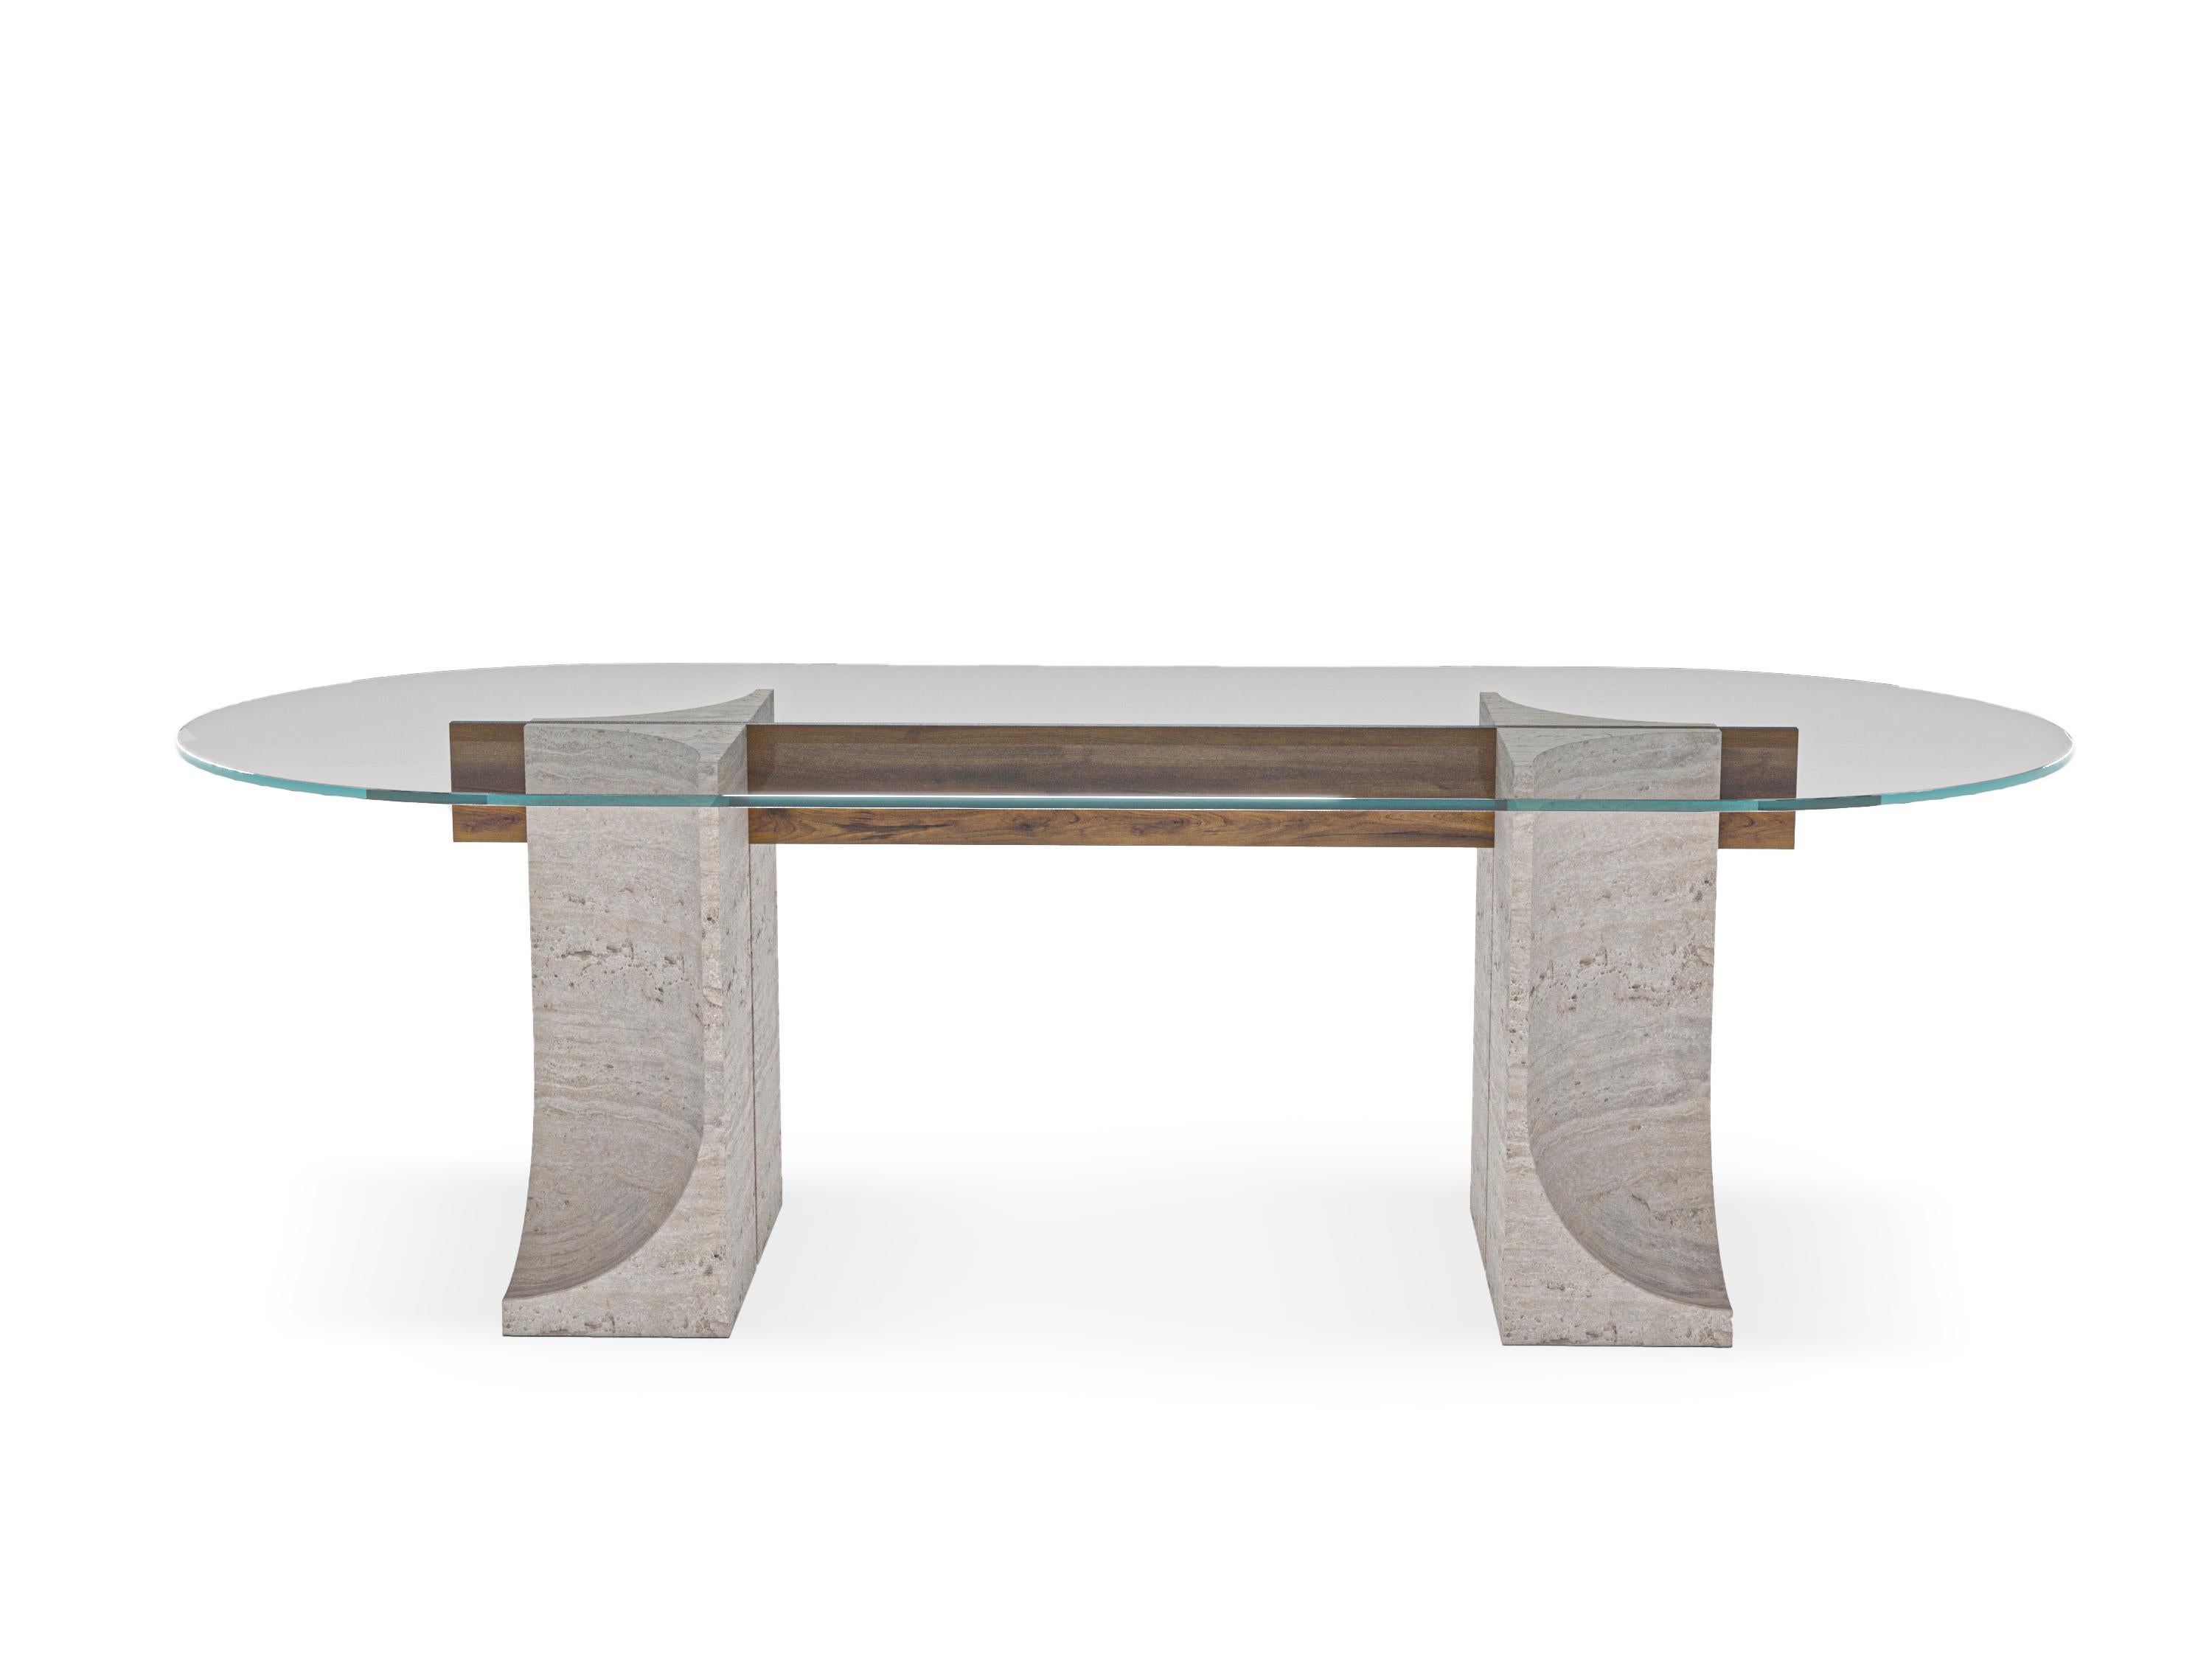 Unique edge dining table by Collector.
Dimensions: W 250 x D 110 x H 78 cm
Materials: glass, Travertino, wood
Other materials available.

The Collector brand aims to be part of the daily life by fusing furniture to our home routine and